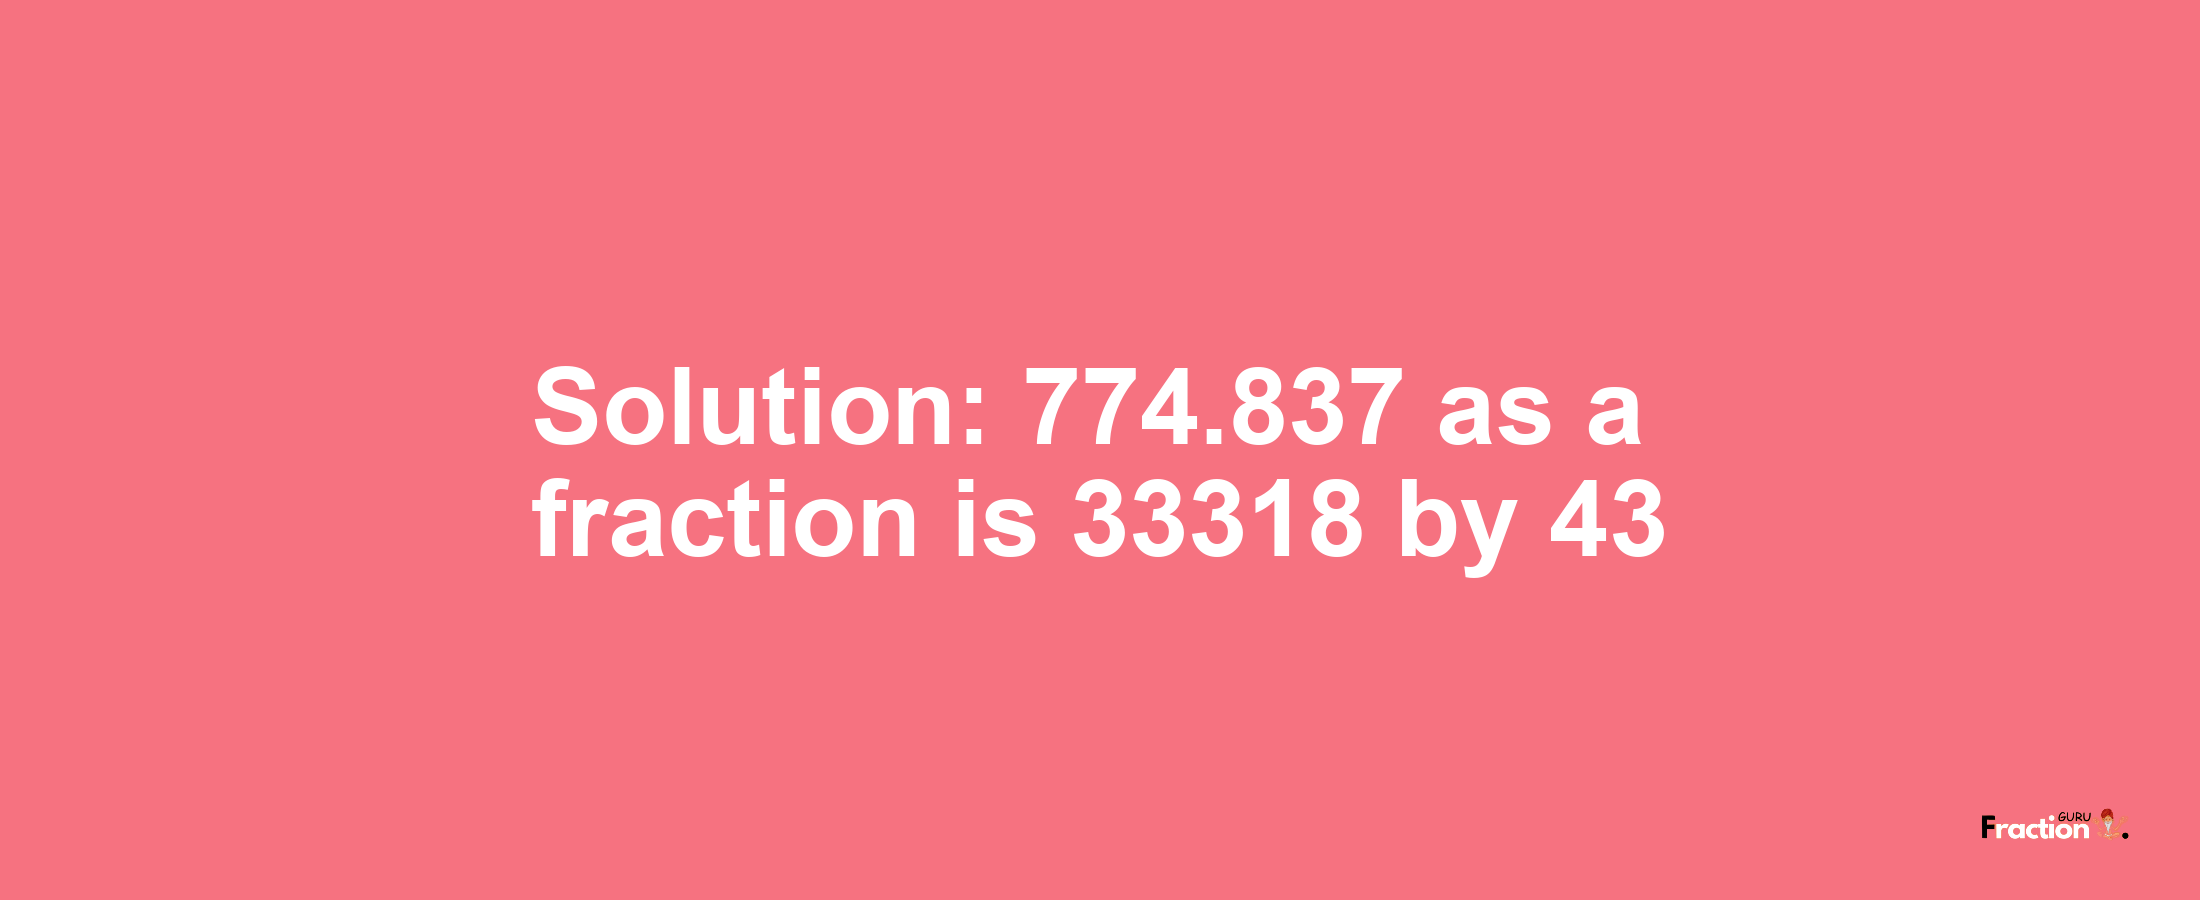 Solution:774.837 as a fraction is 33318/43